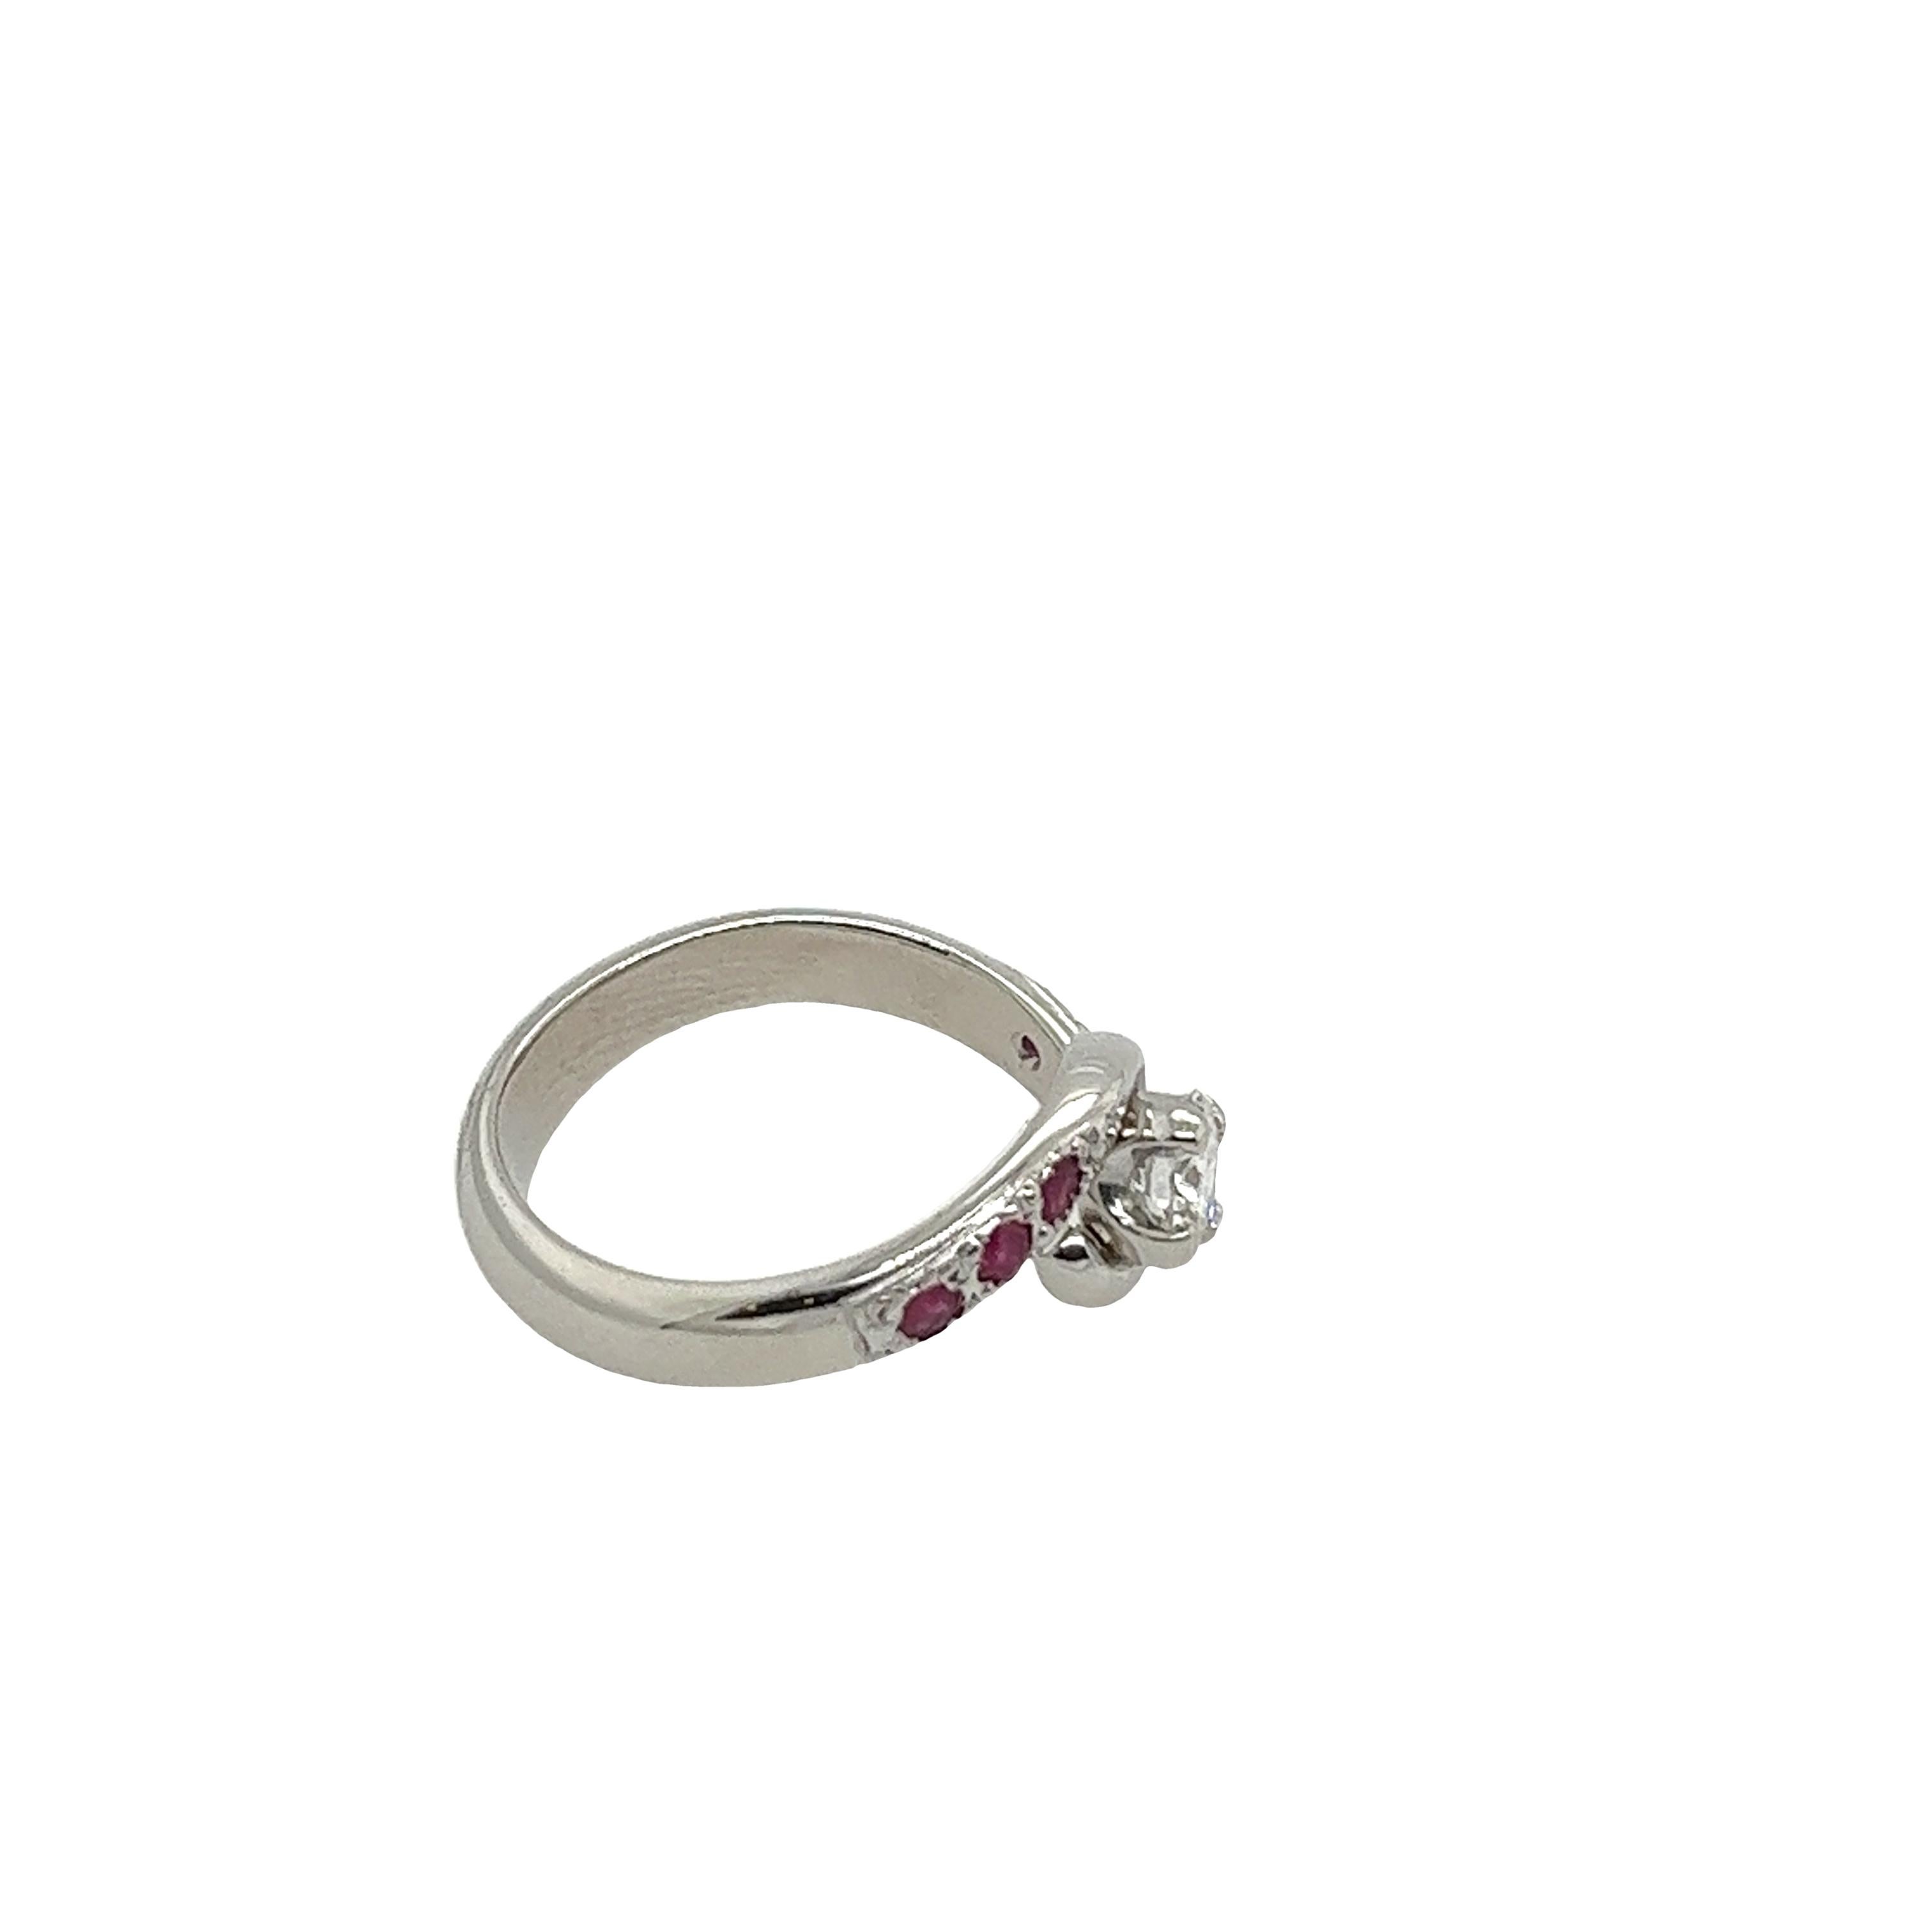 Oval Cut Crossover Platinum Solitaire Round Diamond Engagement Ring 0.33ct with 6 Rubies